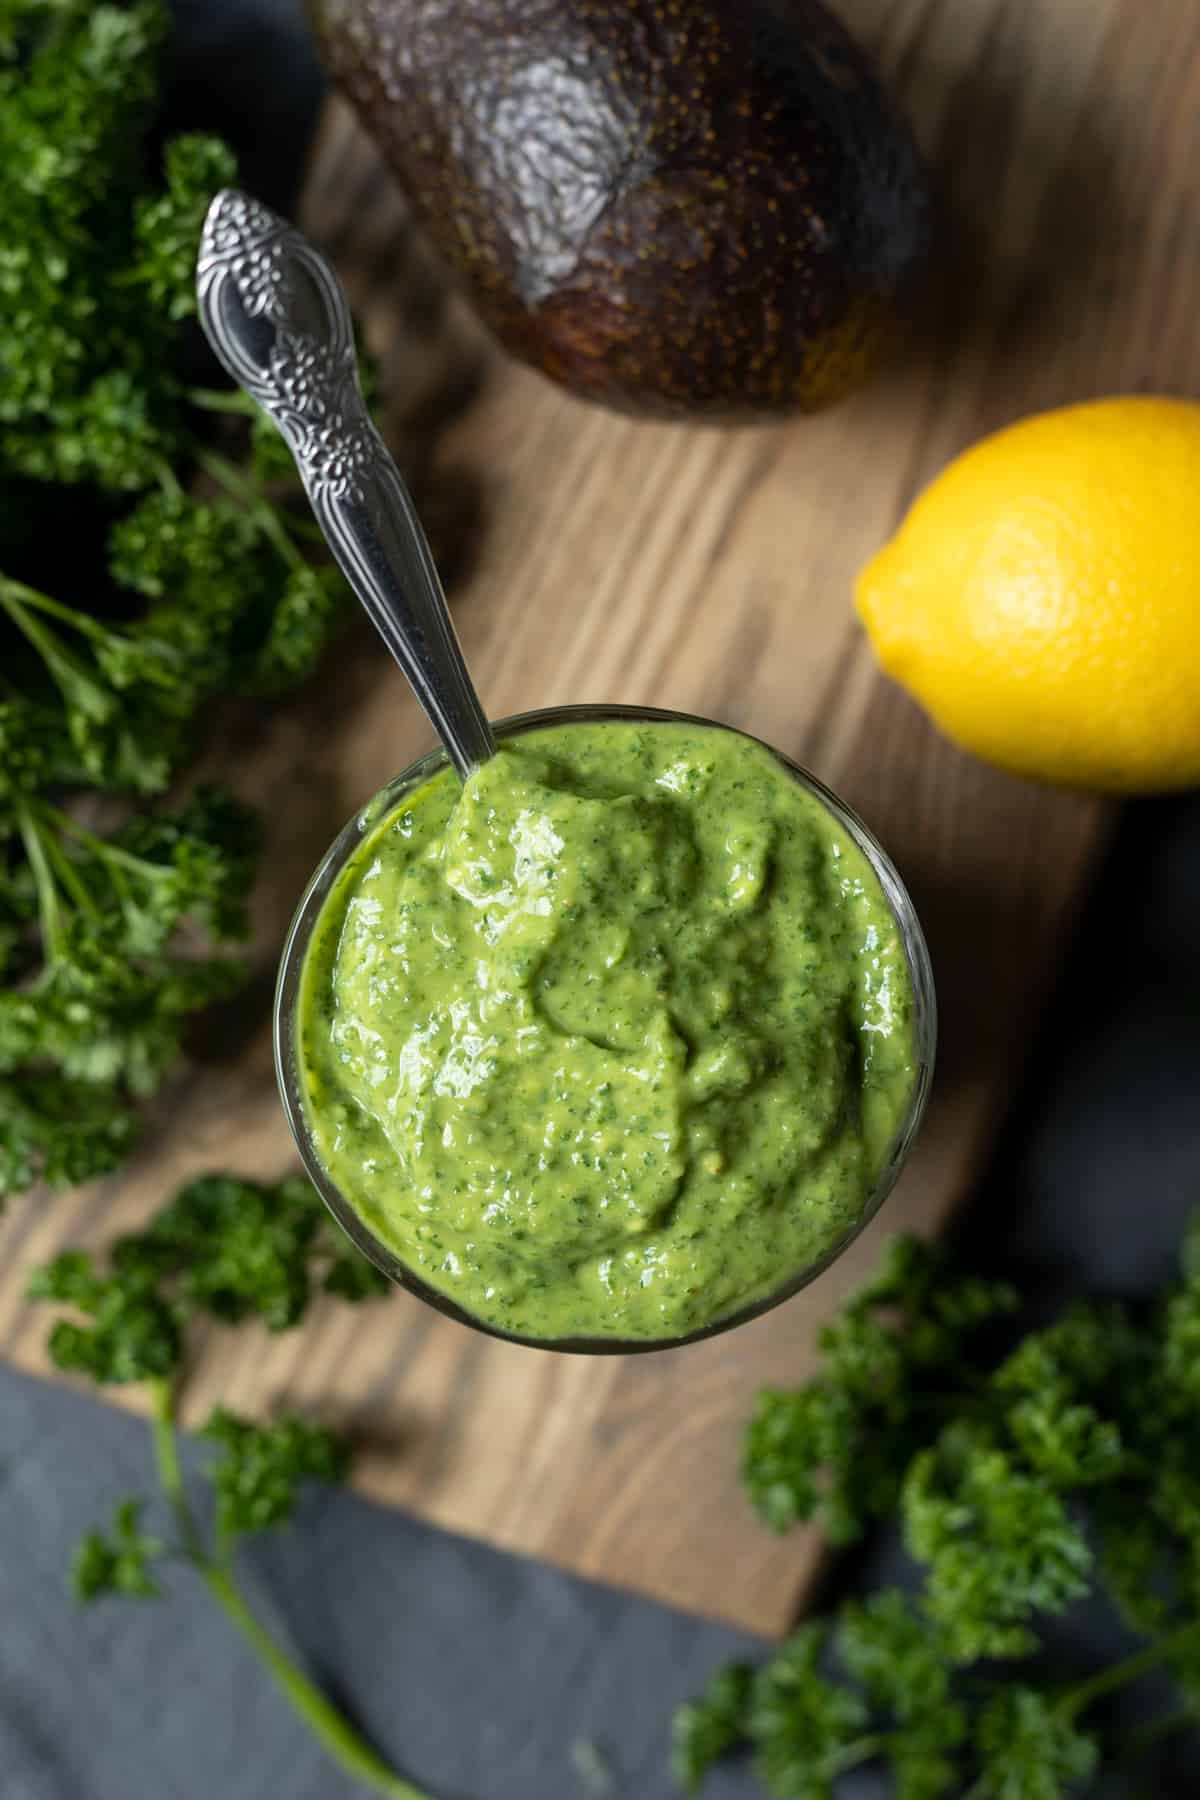 creamy green dressing in a glass surrounded by lemon, parsley, and a whole avodado